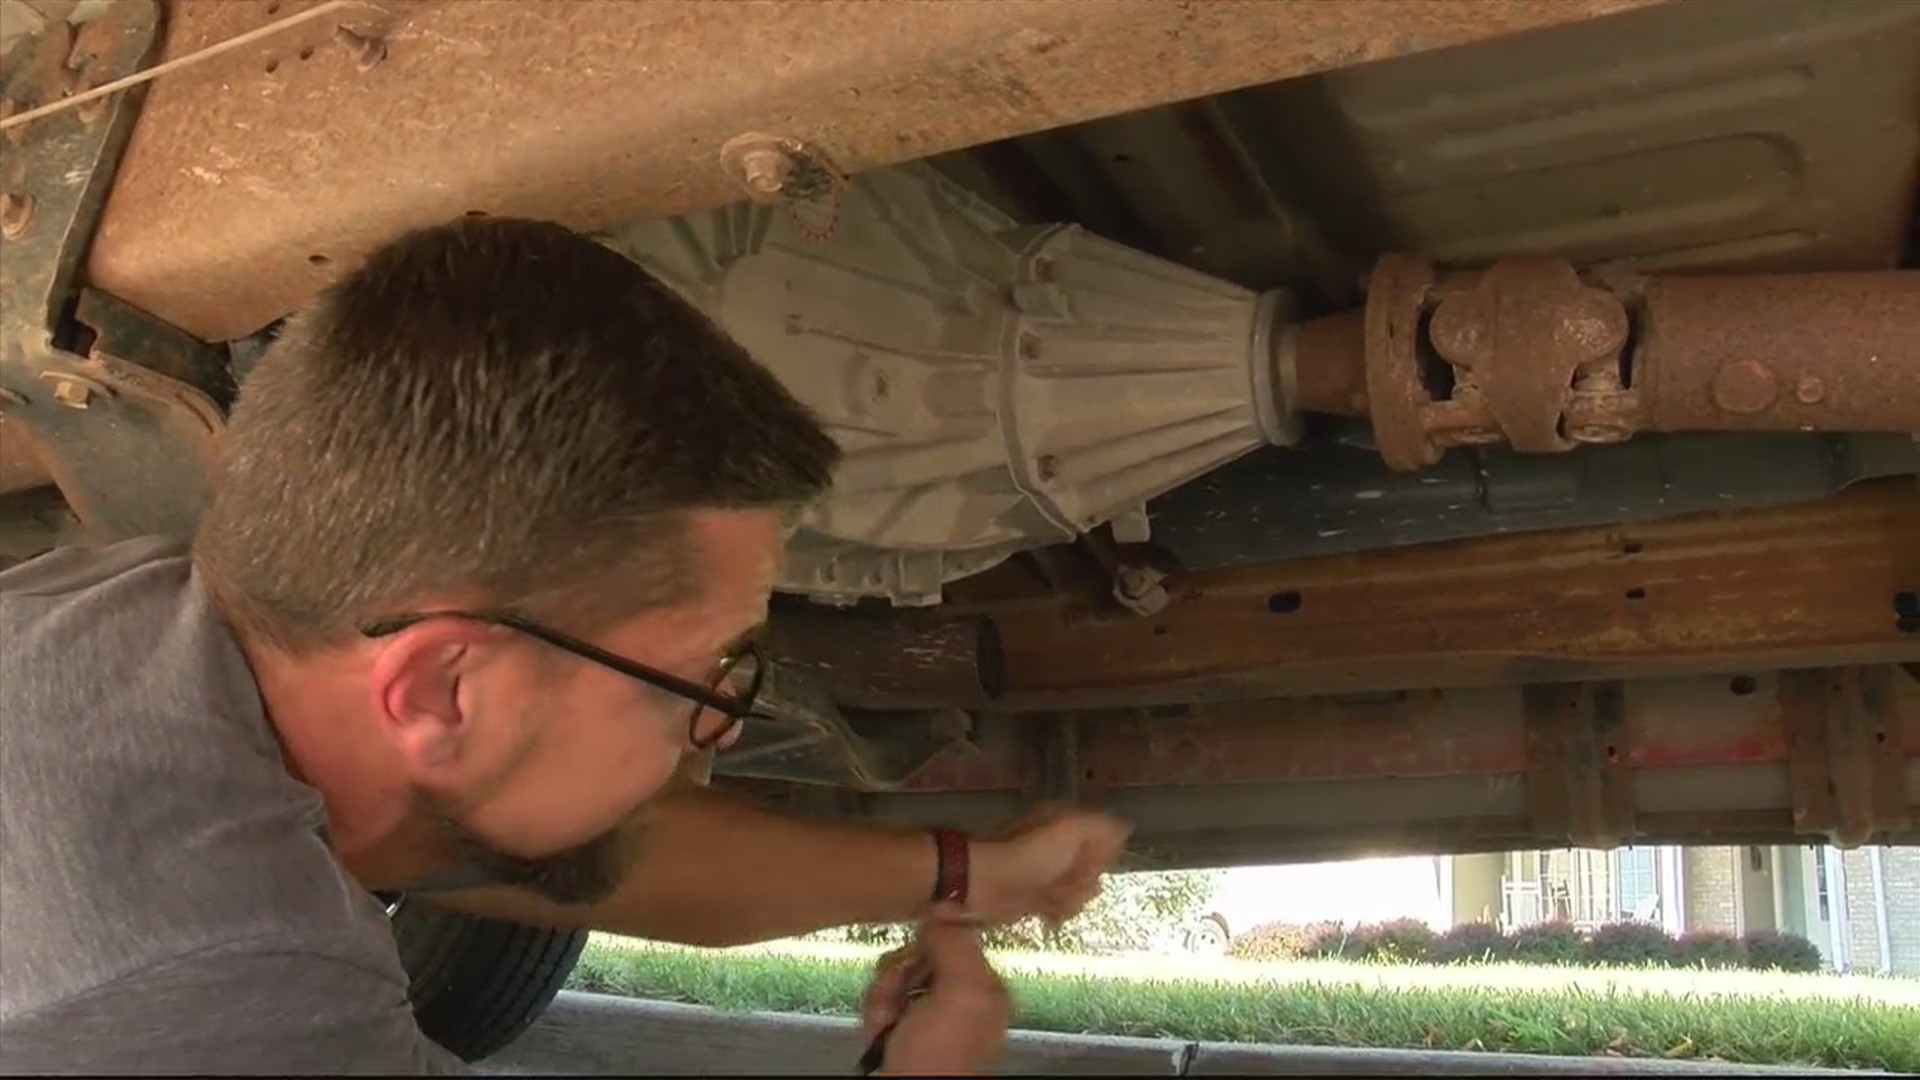 A man says someone crawled underneath his truck and took something that is expensive to replace.Thieves sawed off a catalytic converter from Darin Dowling's truck. Every vehicle has one, and Des Moines Police say that it's a hot item on the market right now.